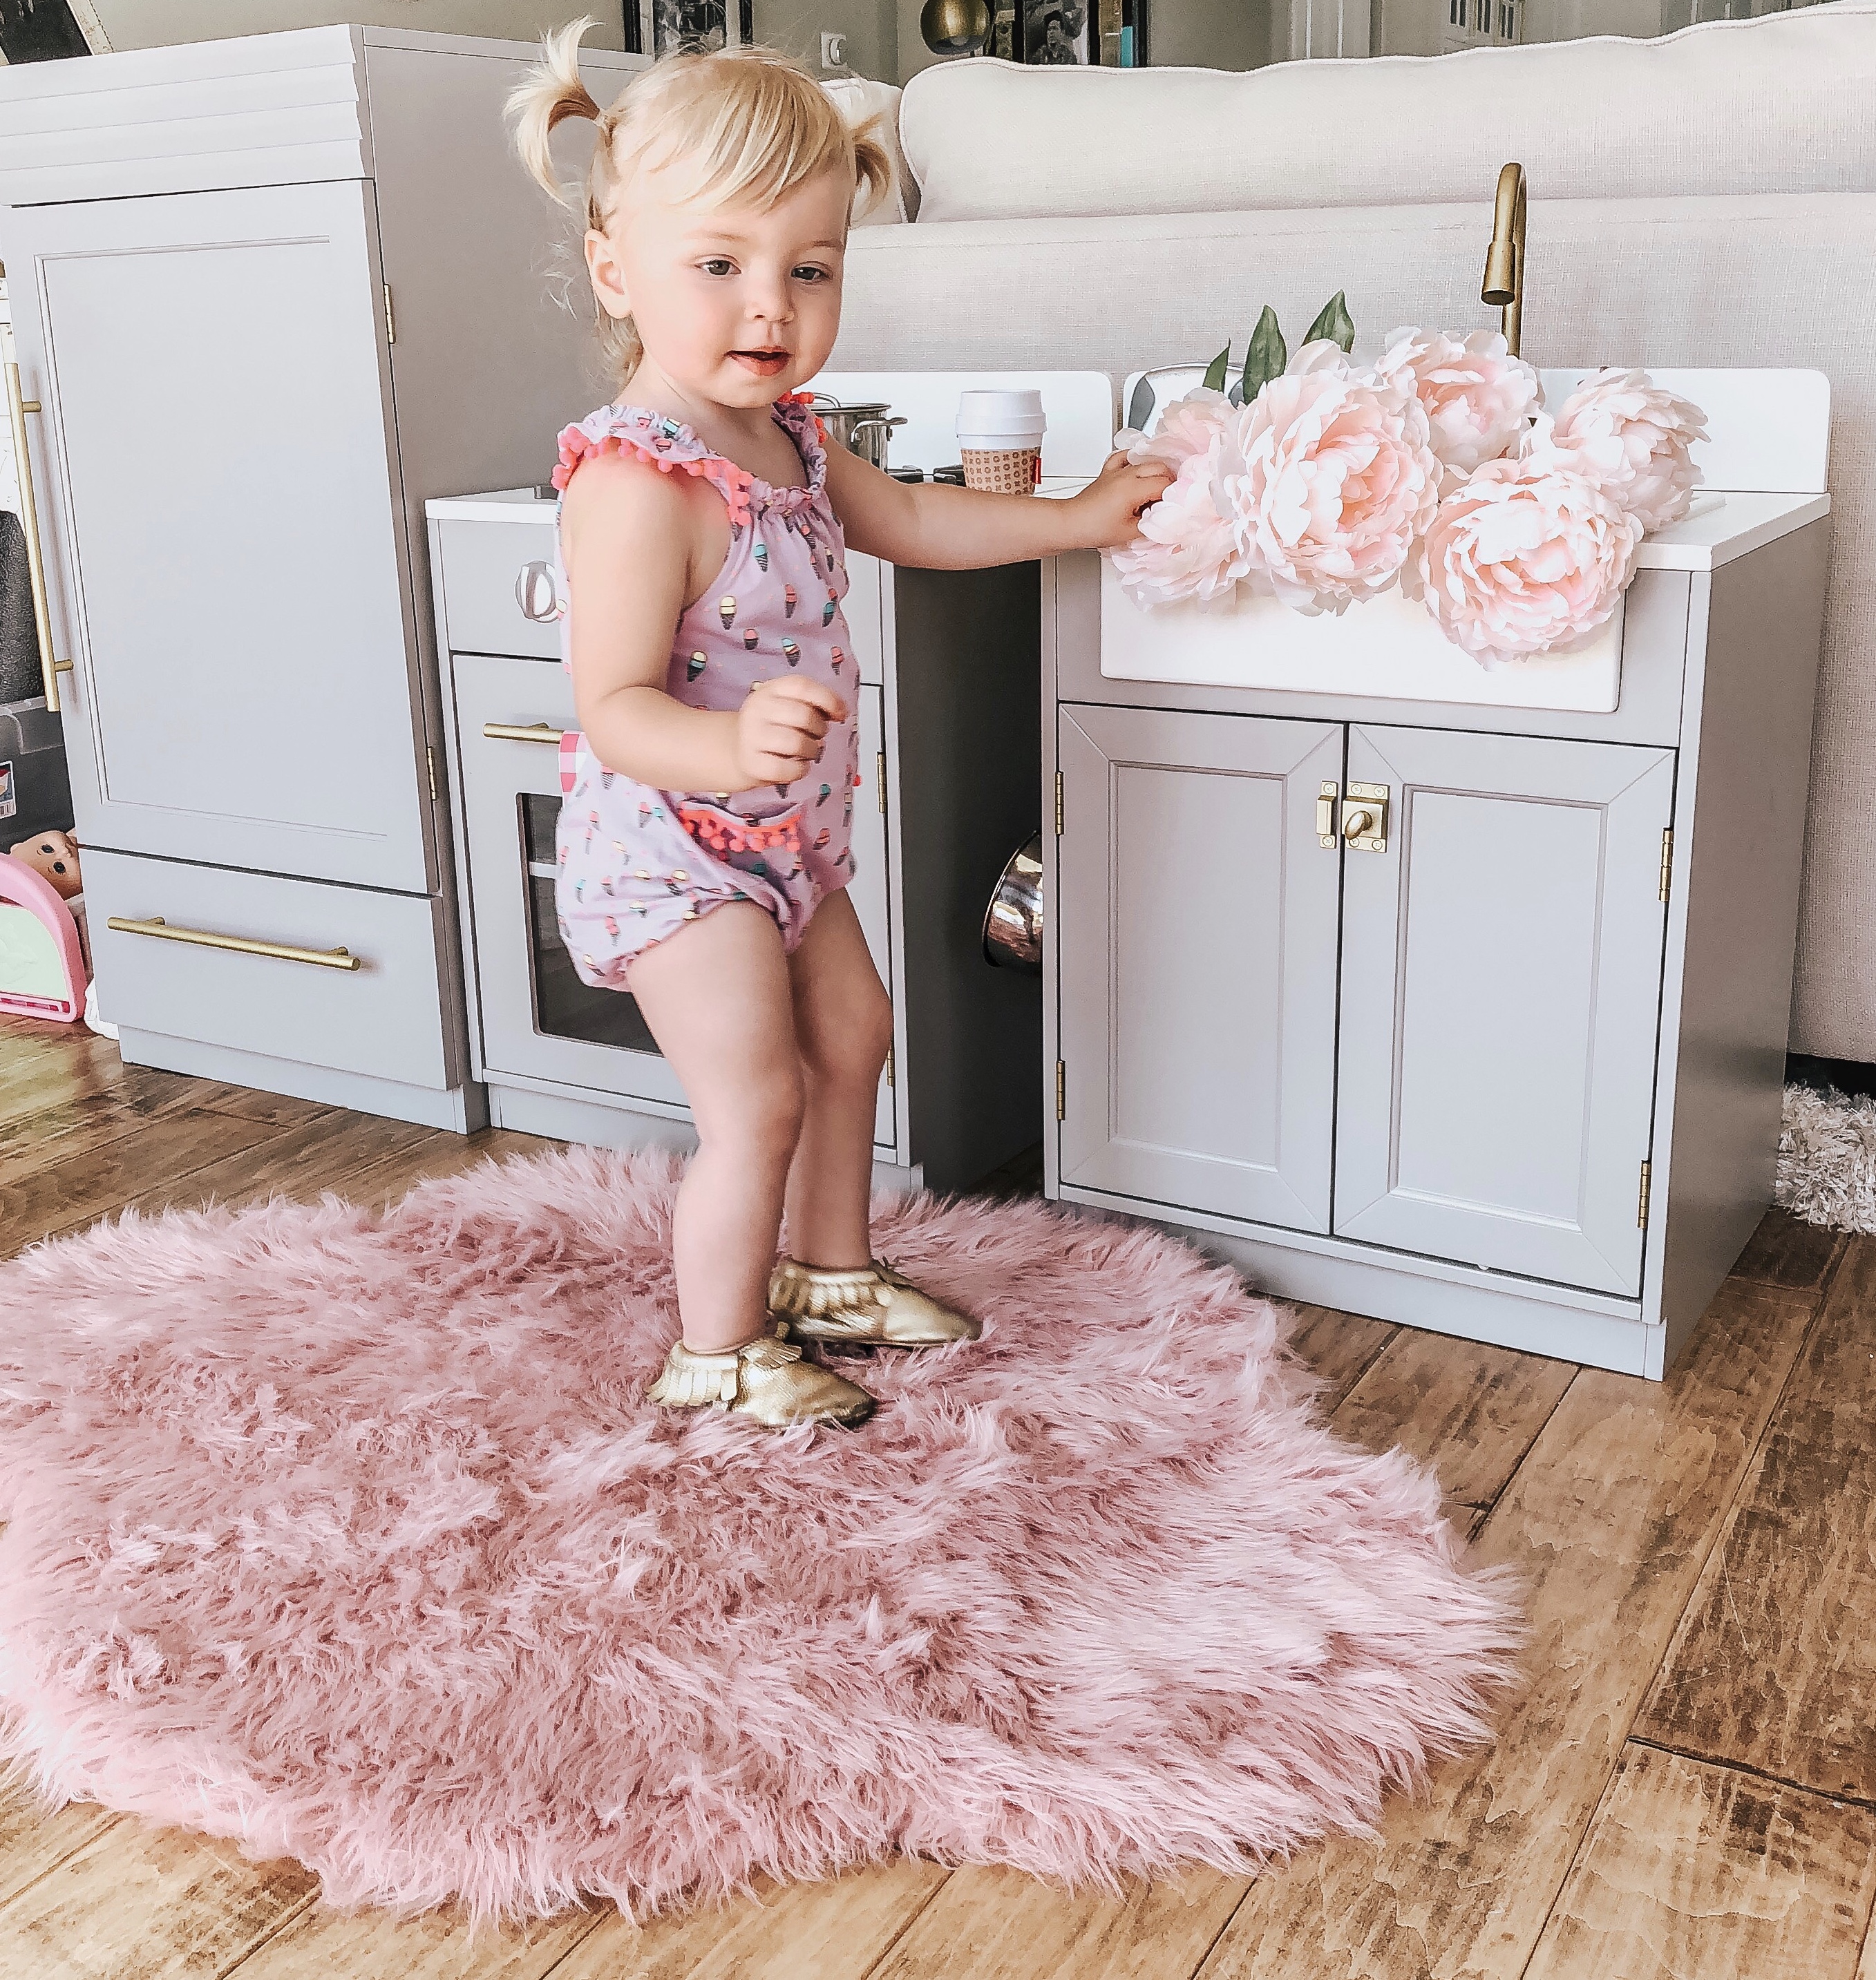 Lifestyle Blogger Katelyn Jones of A Touch of Pink Blog share her daughter's 18-19 month update